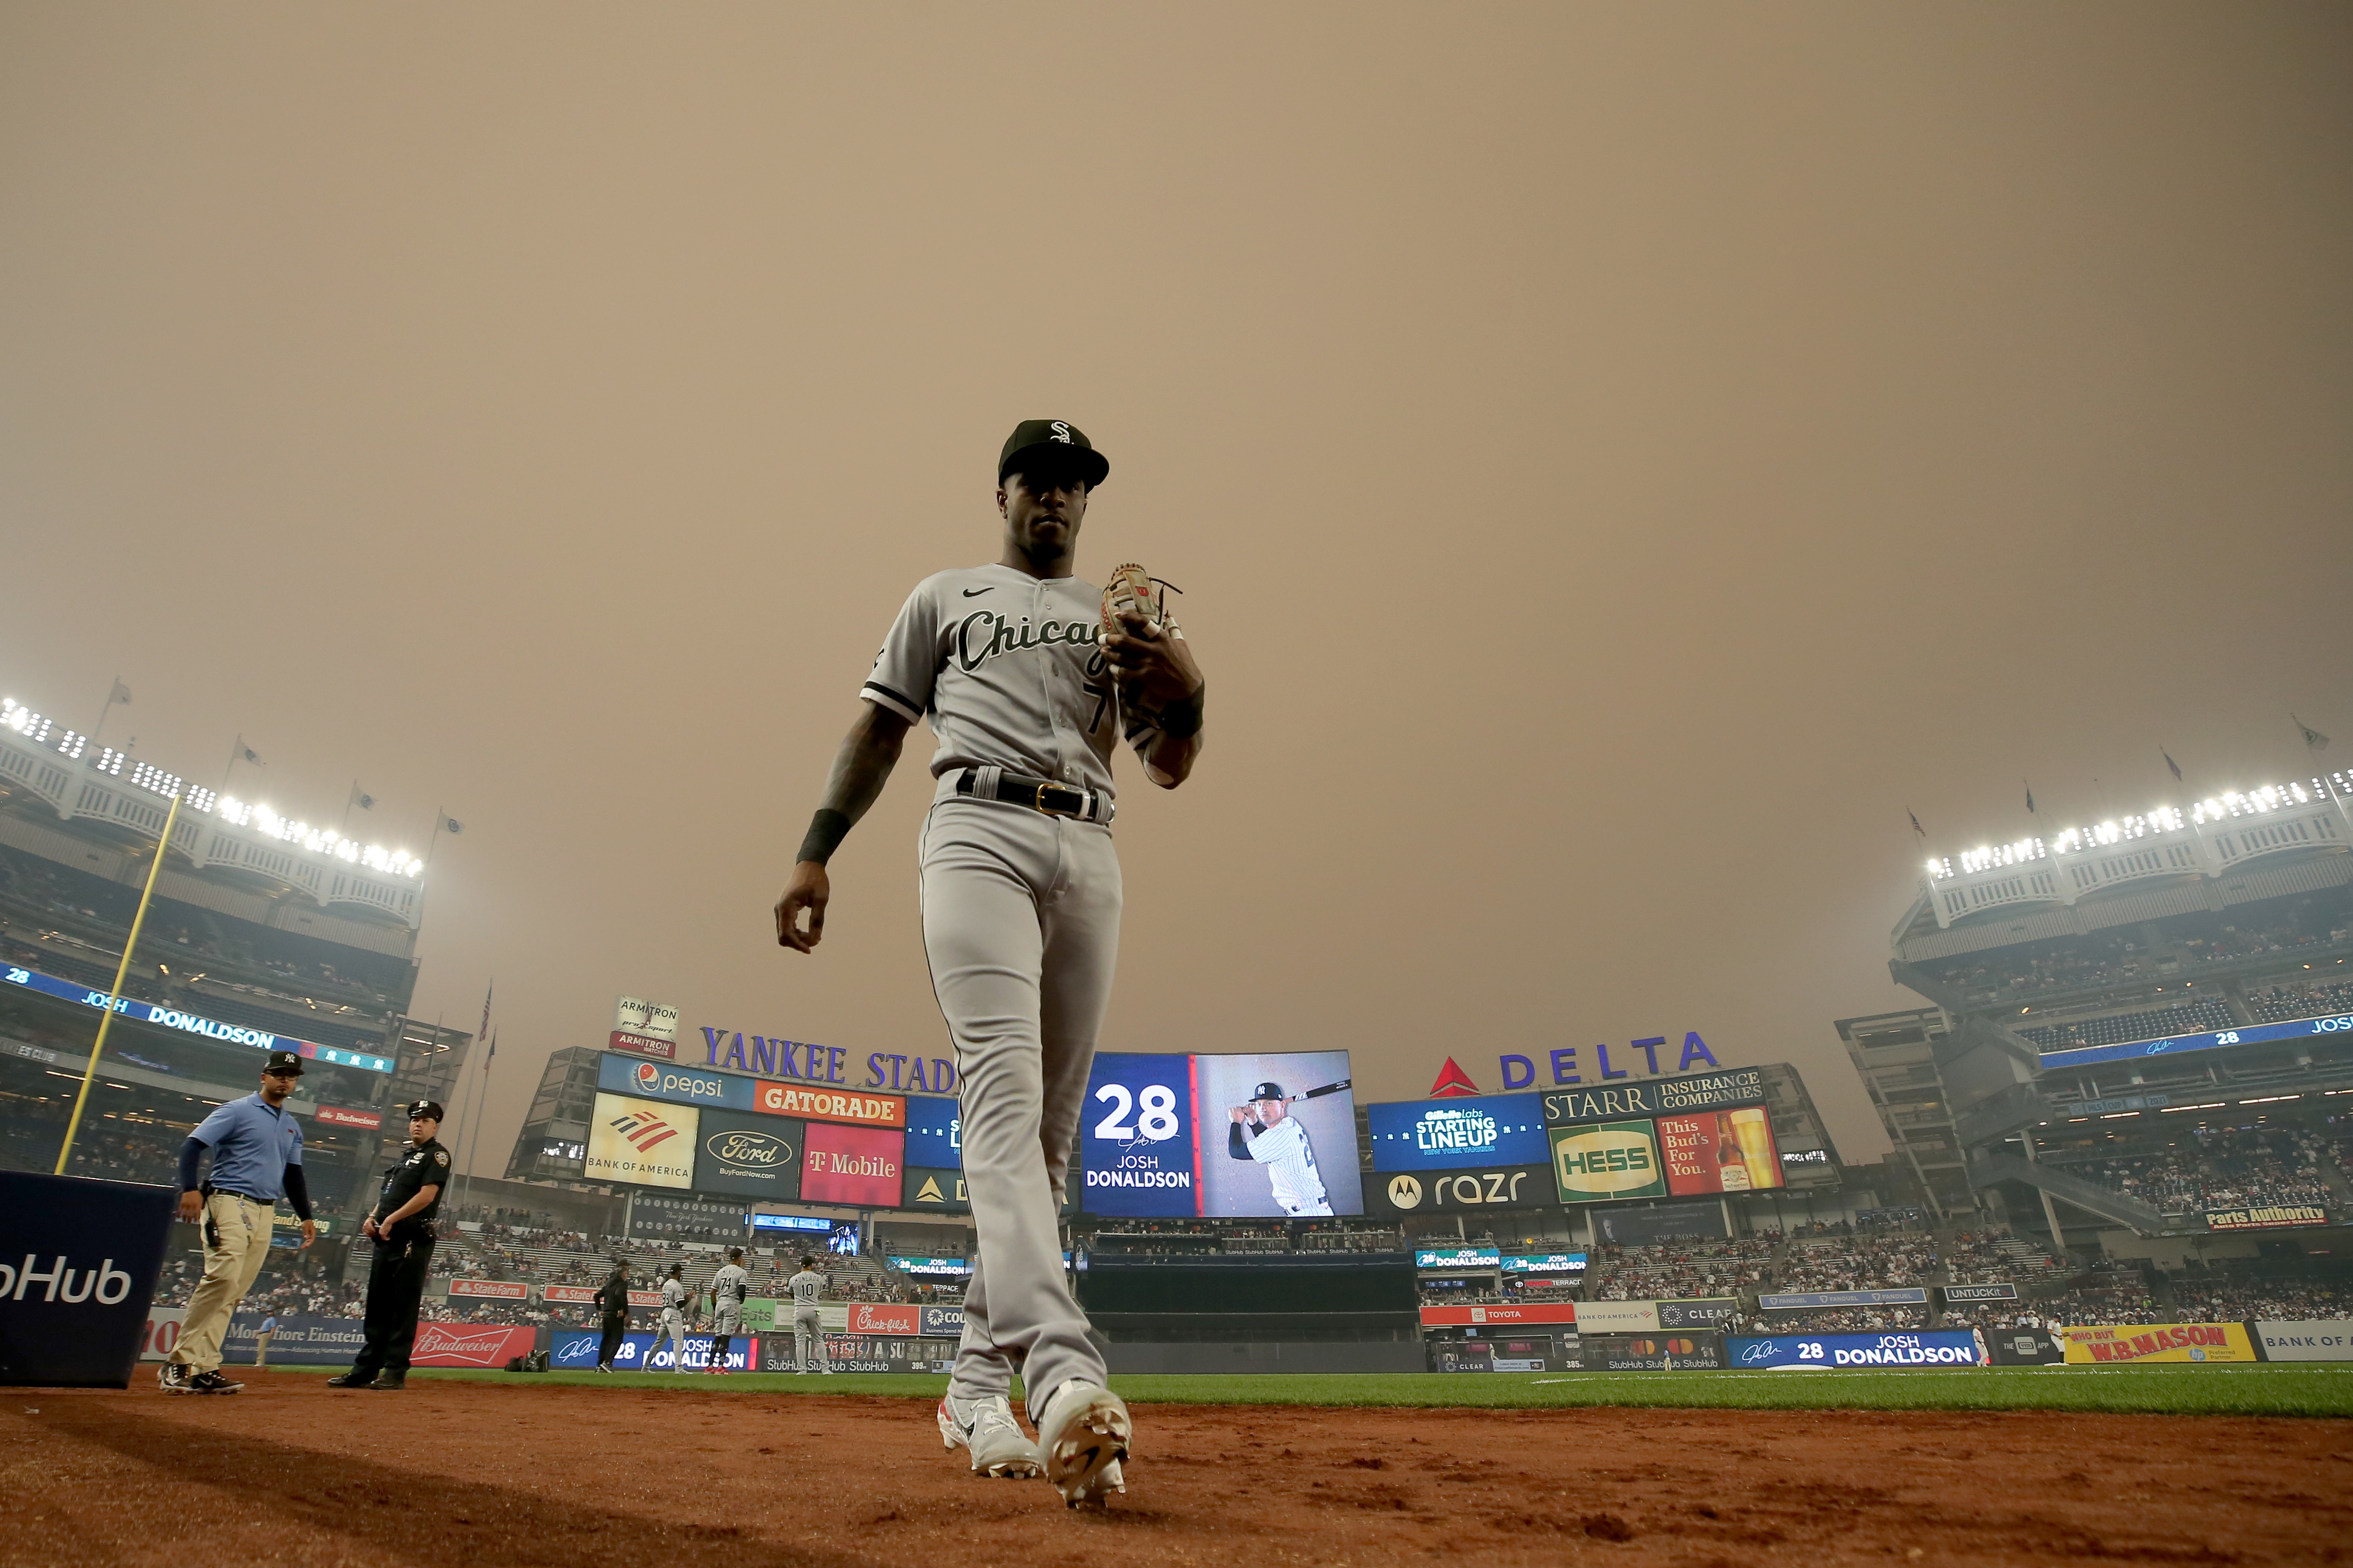 Yankees stadium turns orange: MLB and other sports forced to cancel games  after Canadian wildfires - AS USA